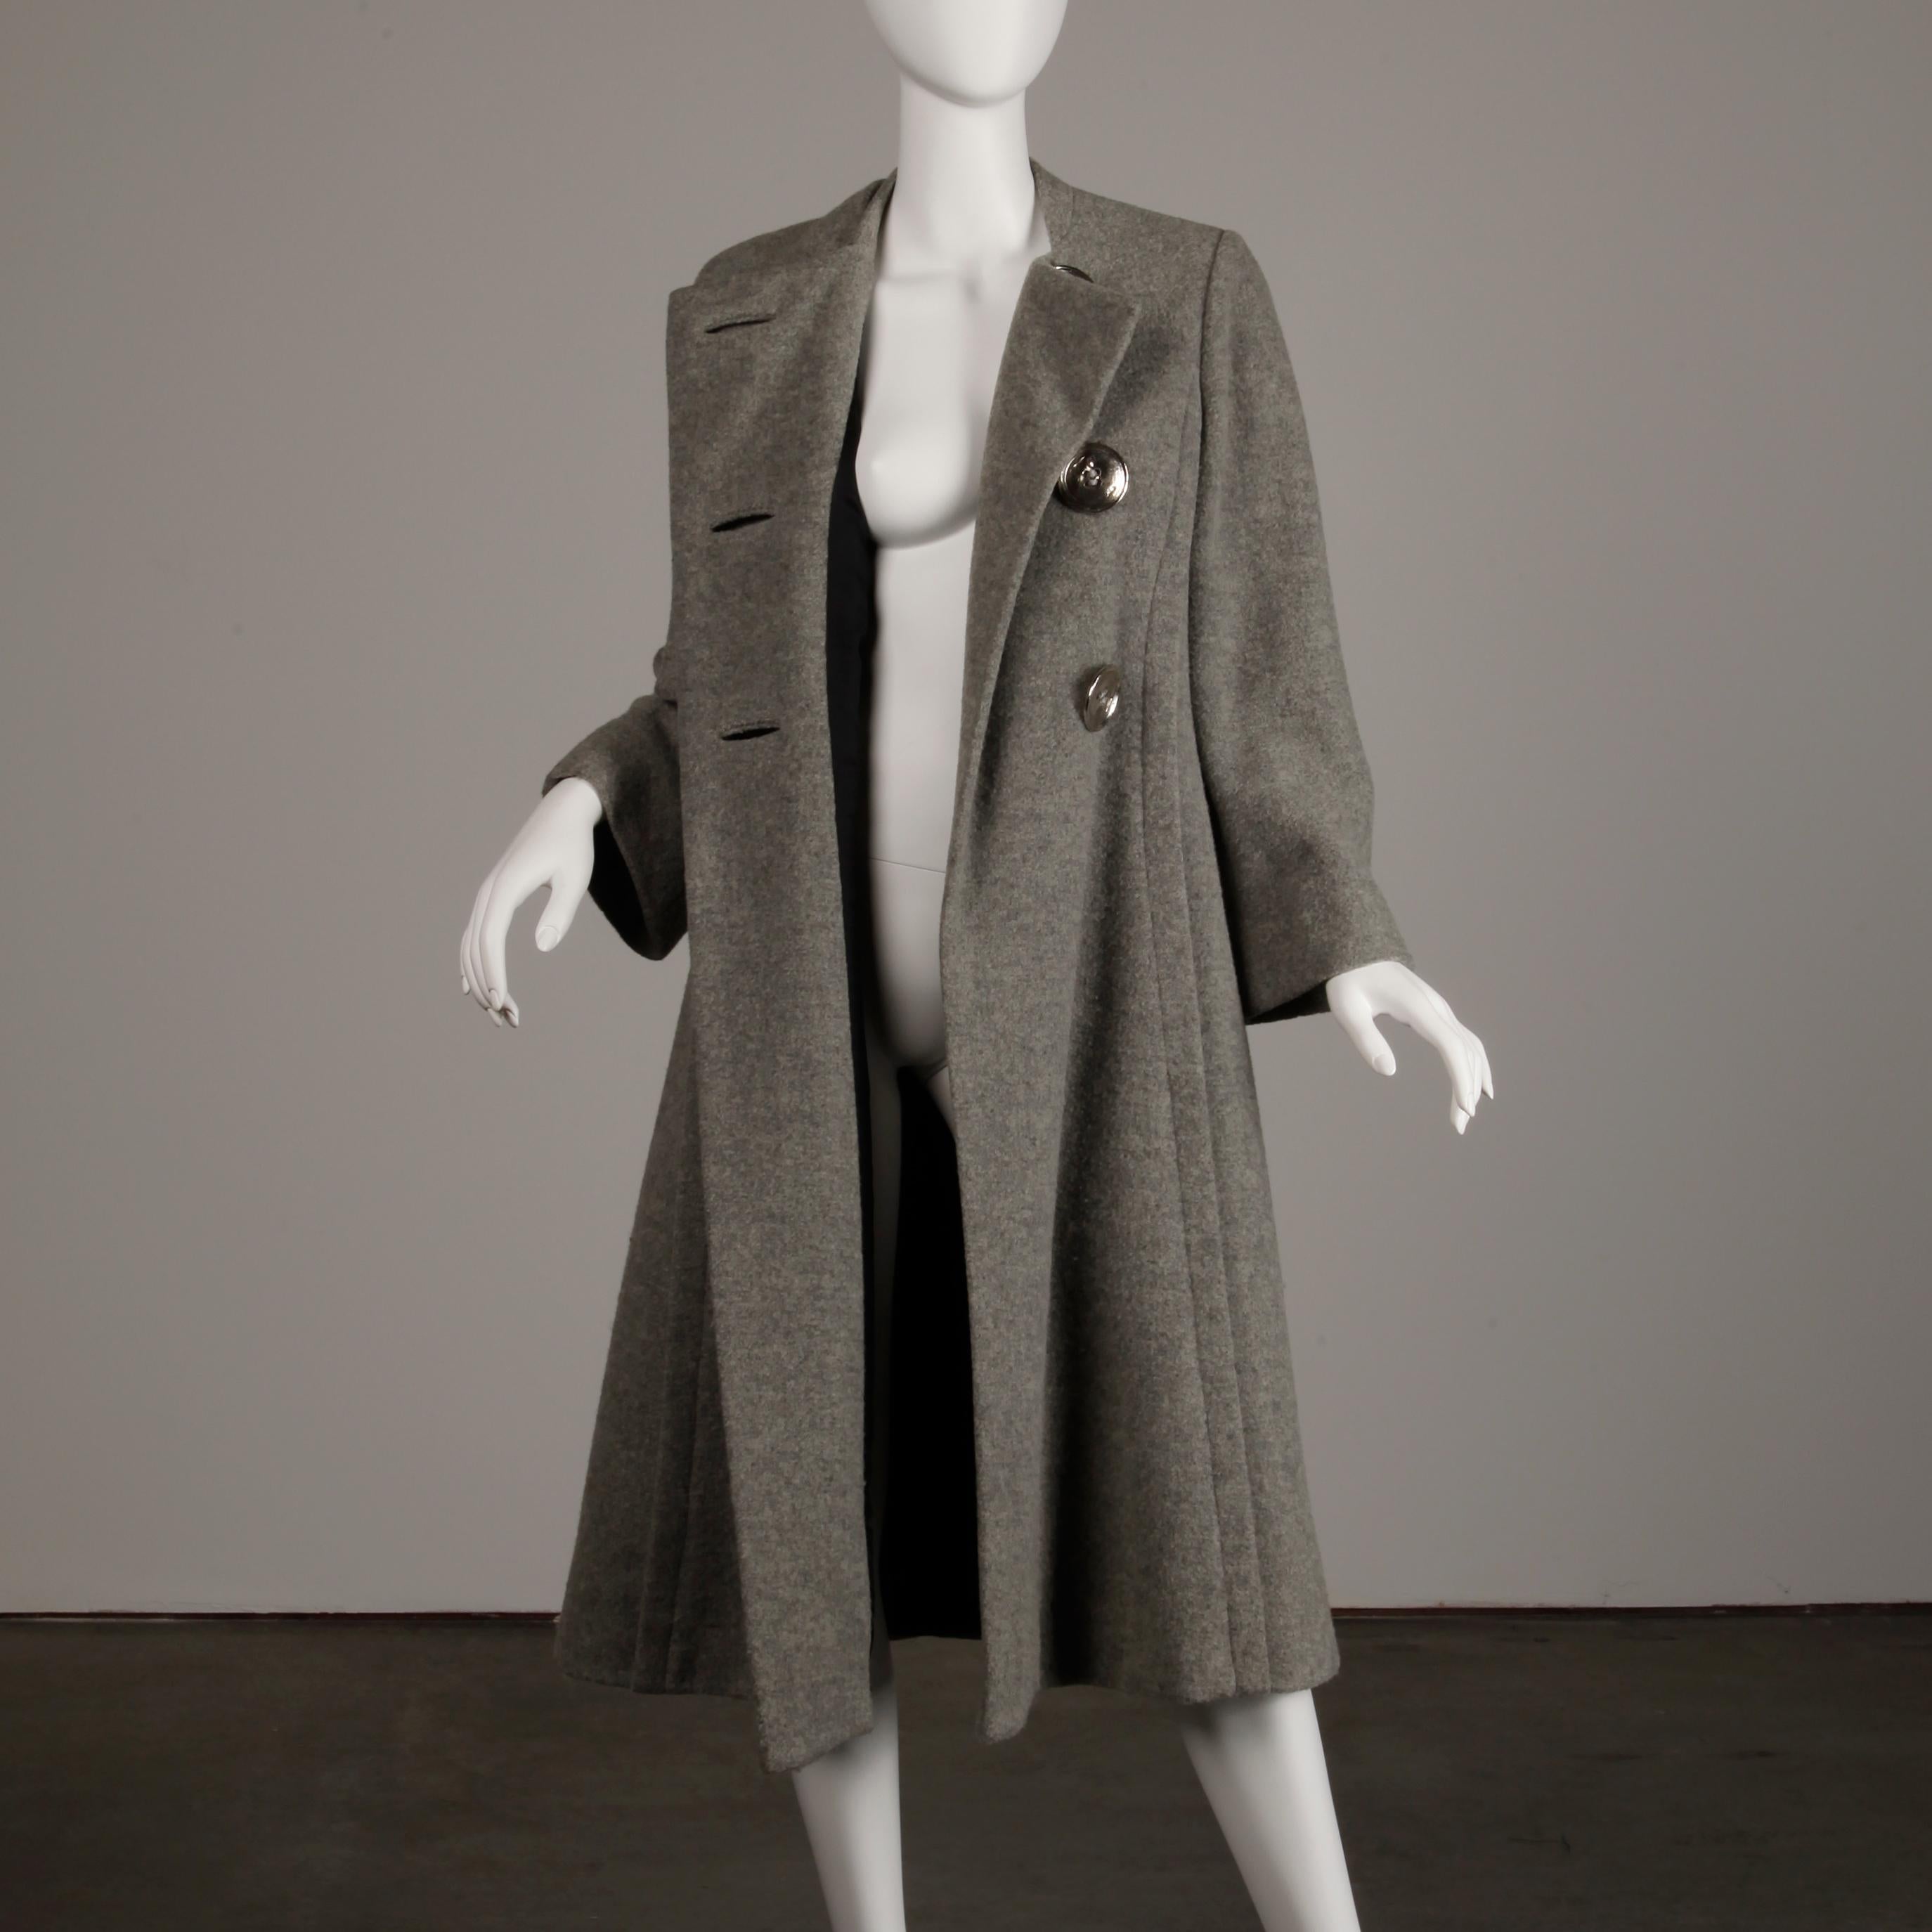 Women's 1970s Pauline Trigere Vintage Gray Wool Asymmetric Coat with Attached Scarf